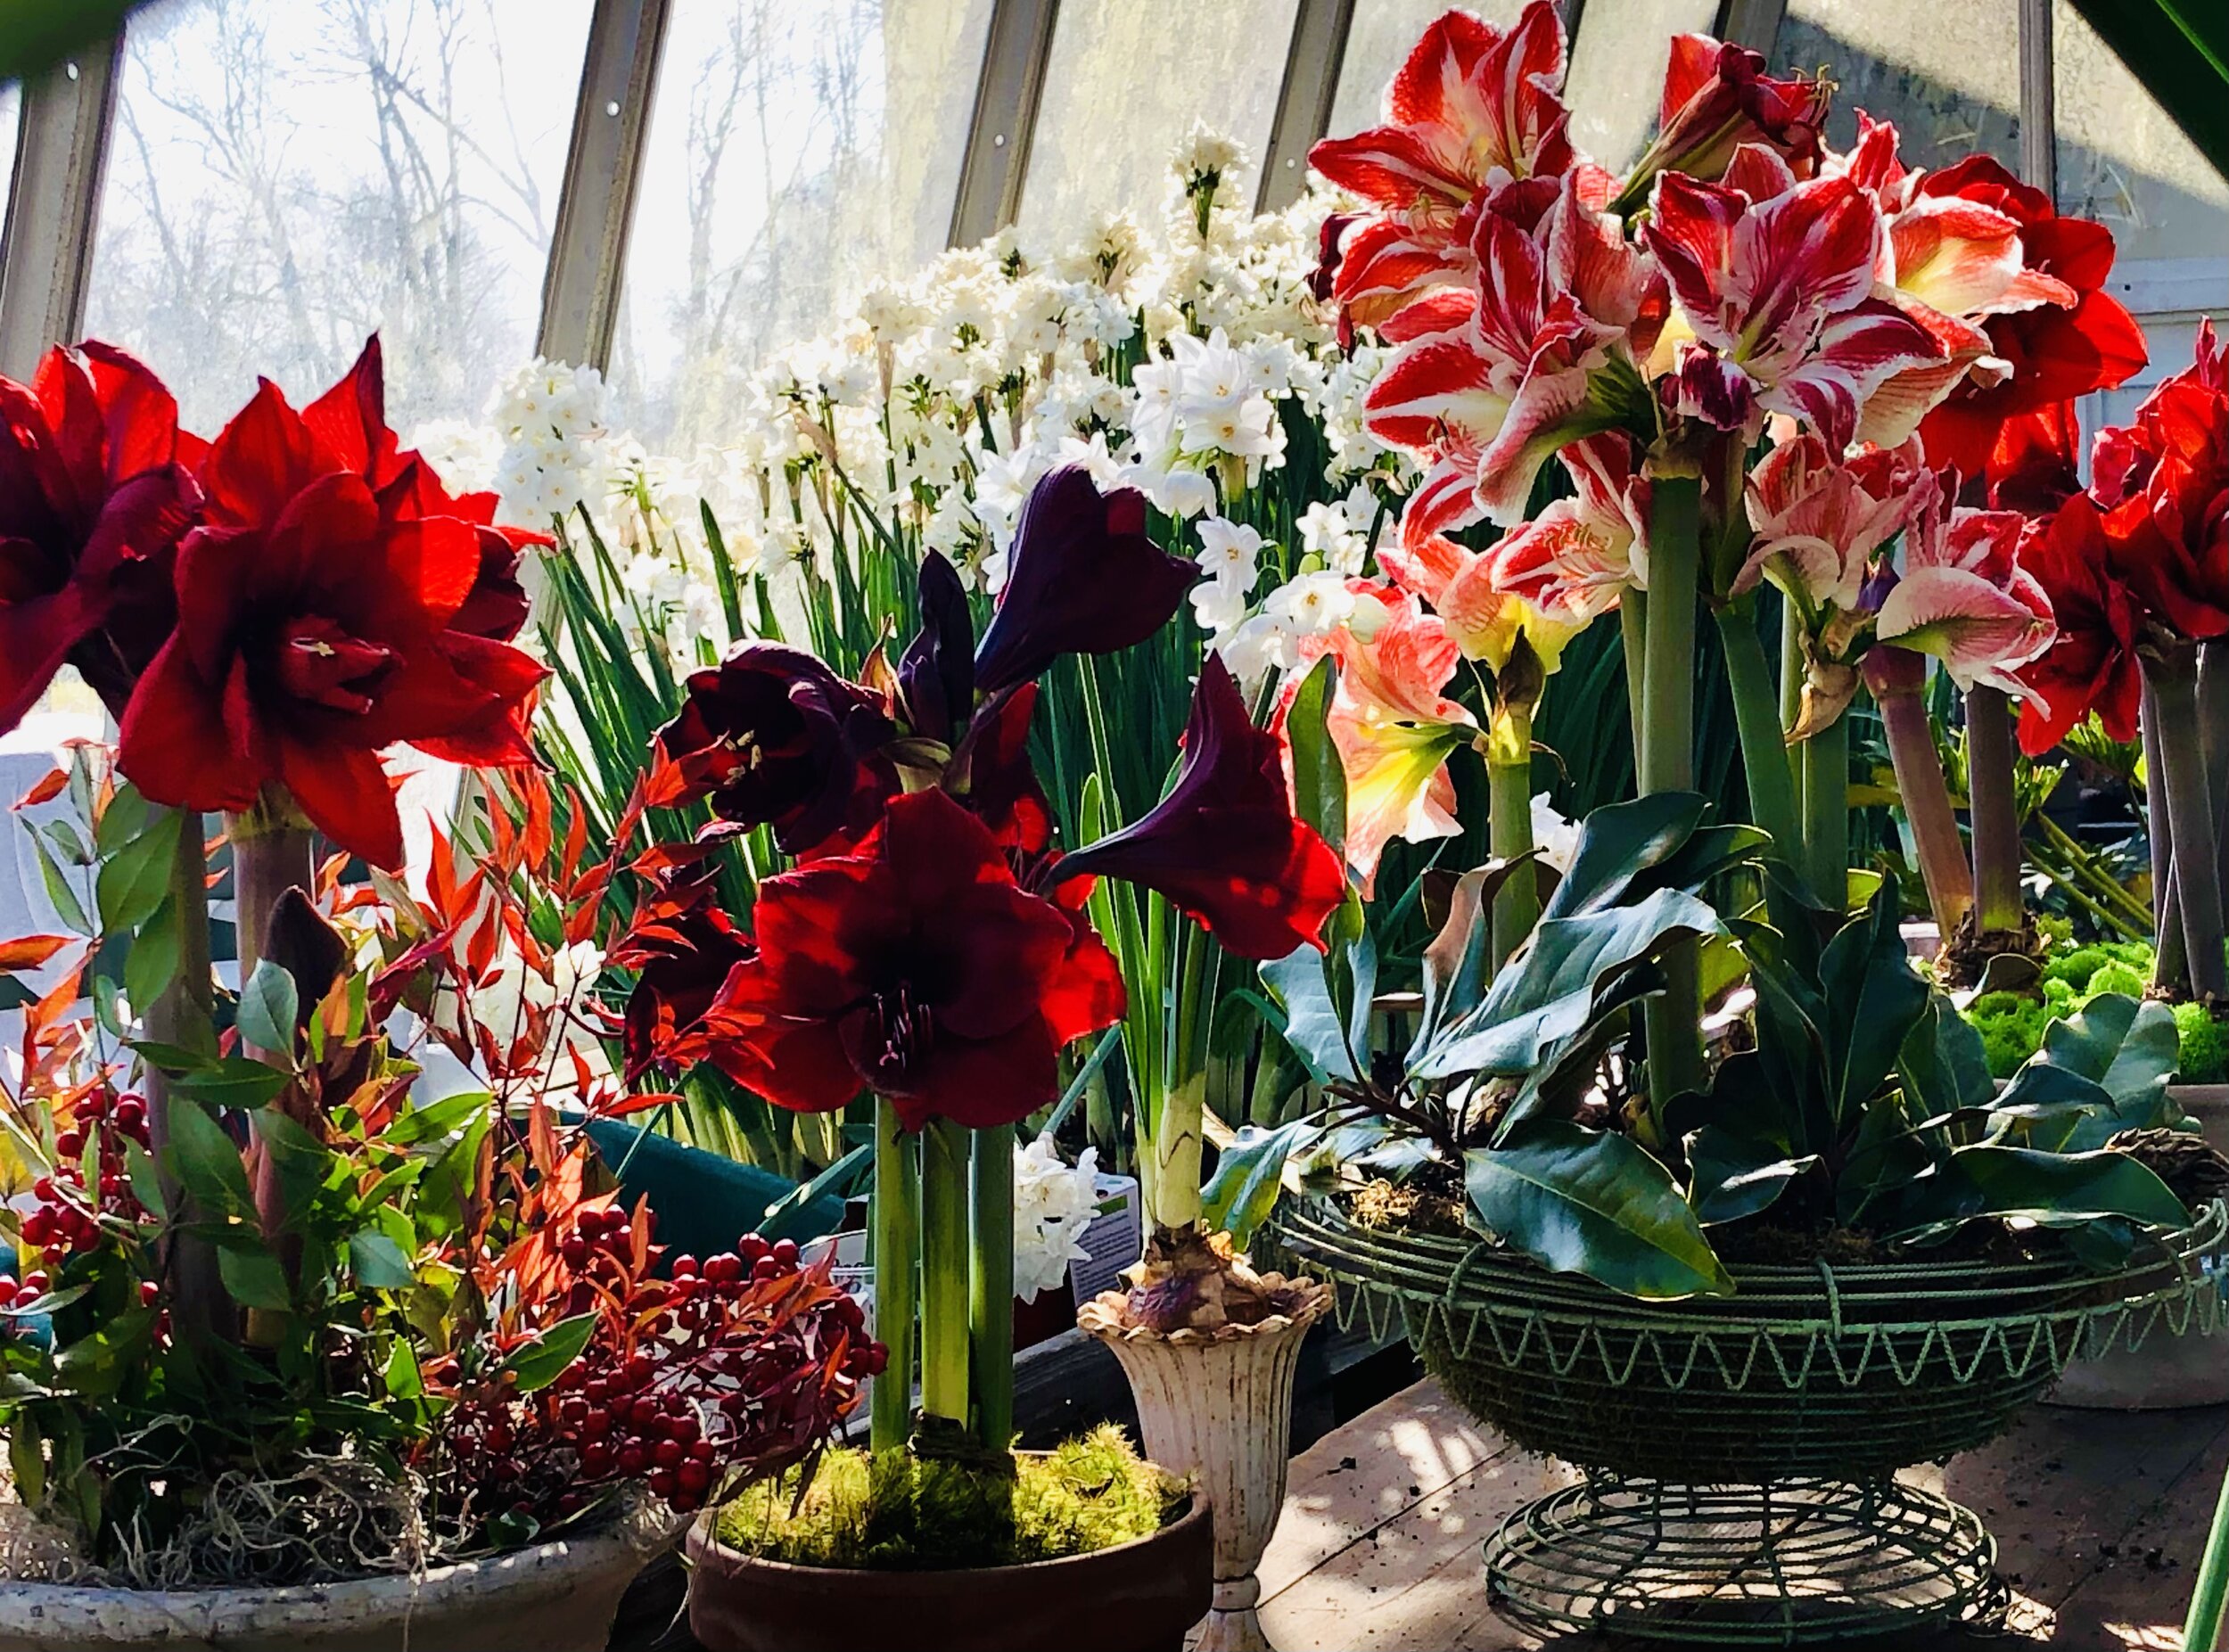  All of the amaryllis pictured are Peruvian bulbs that I started out in 6” green plastic growers pots, which is what I do with all of the Peruvian bulbs. I put them on heat and under lights in the basement, moving them to the cooler to hold when they